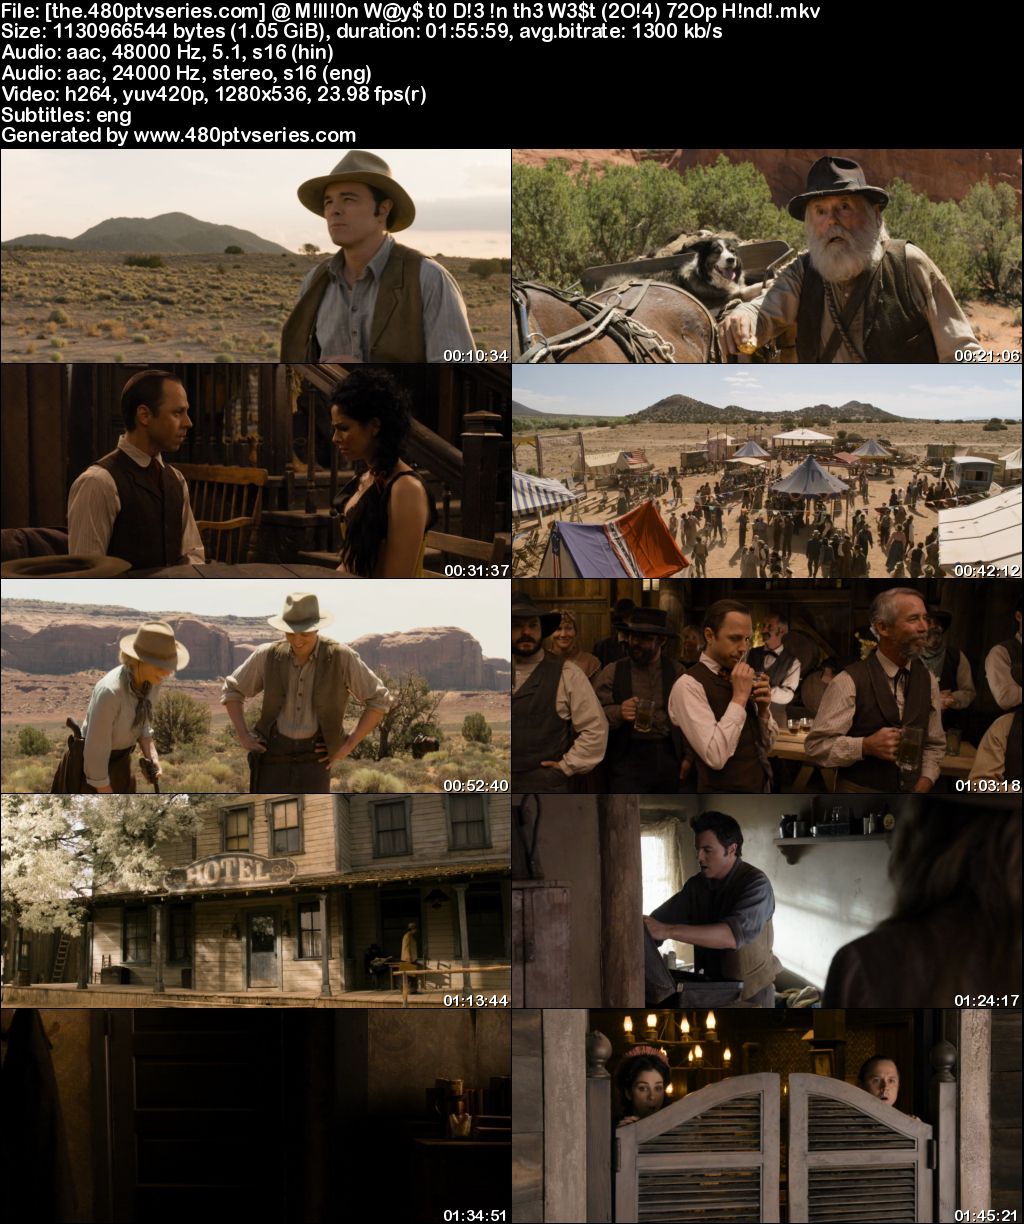 Watch Online Free A Million Ways to Die in the West (2014) Full Hindi Dual Audio Movie Download 480p 720p Bluray